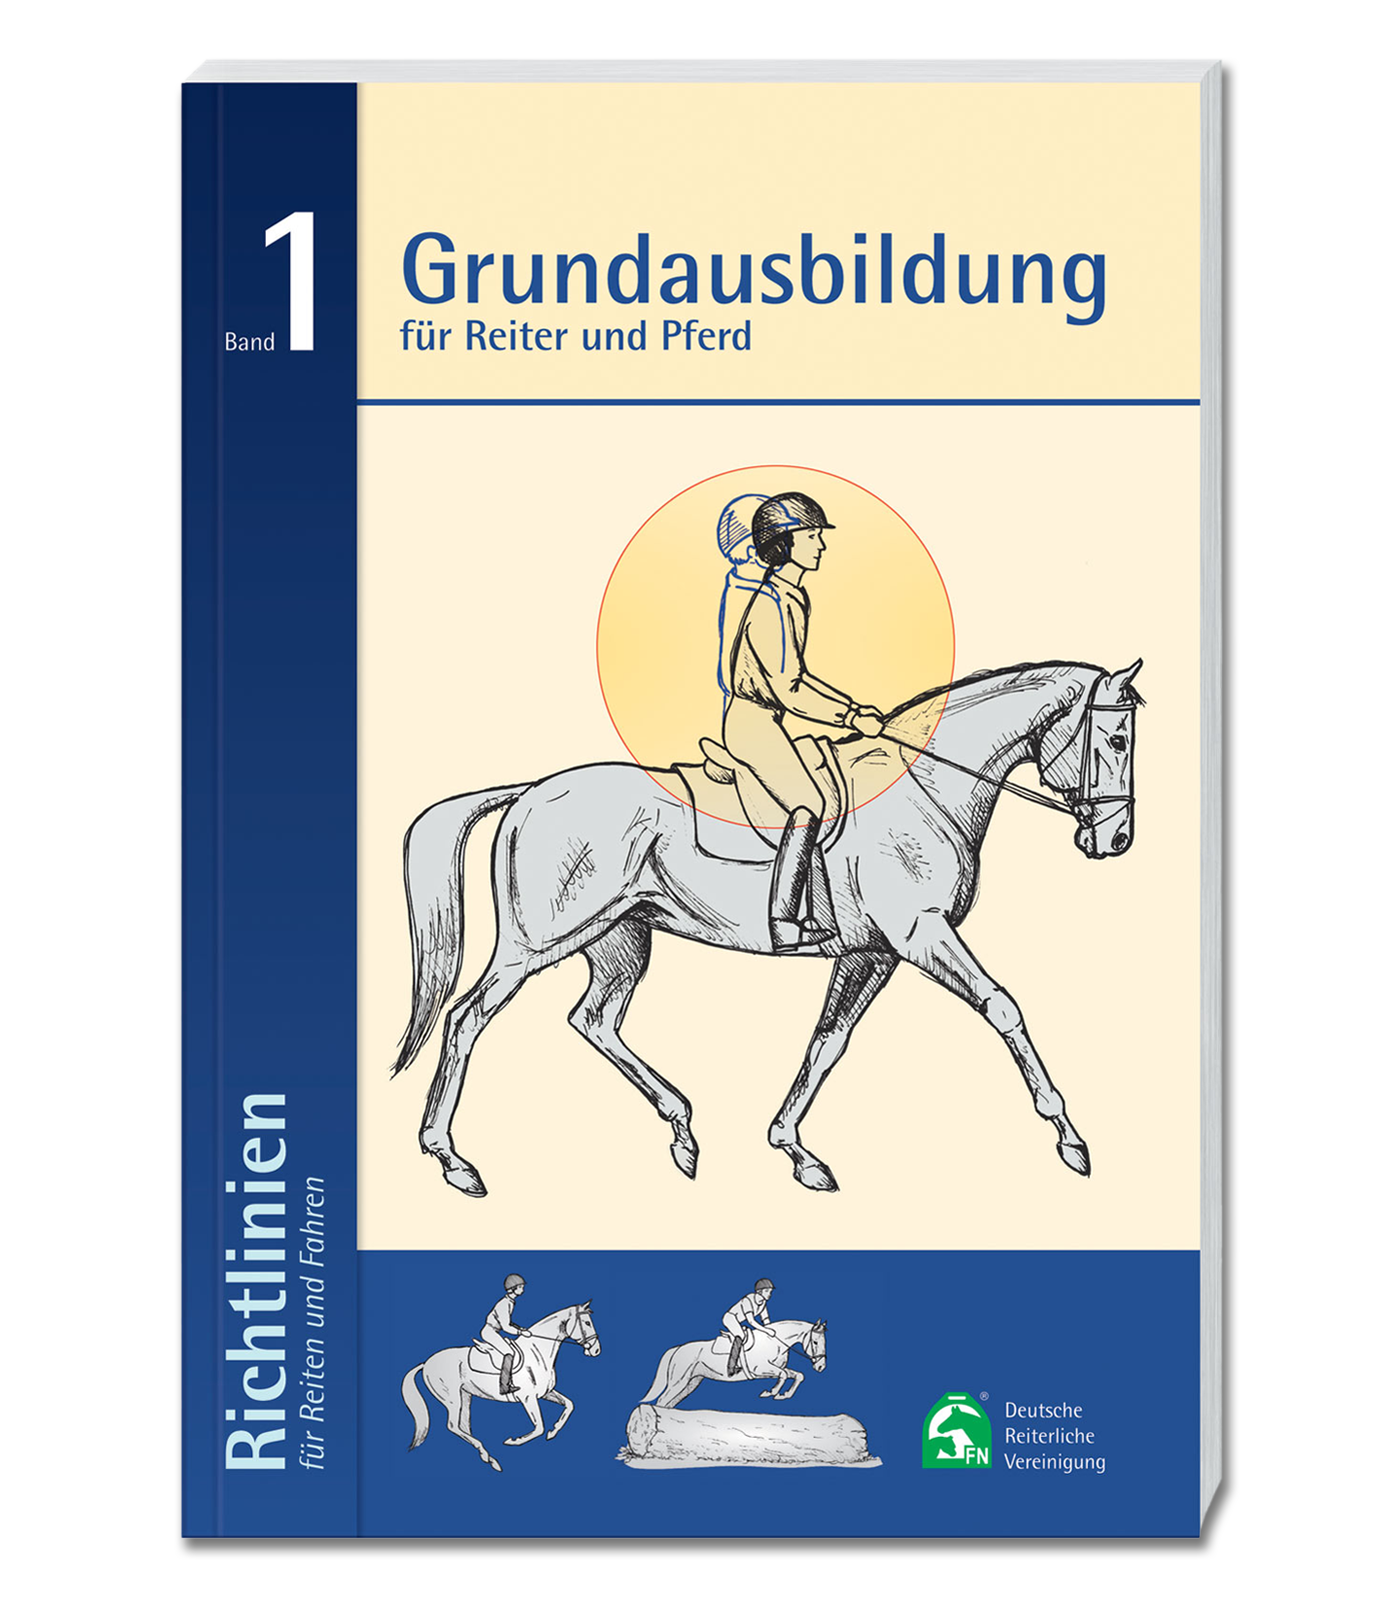 Guidelines Volume 1: Basic Training for Rider and Horse